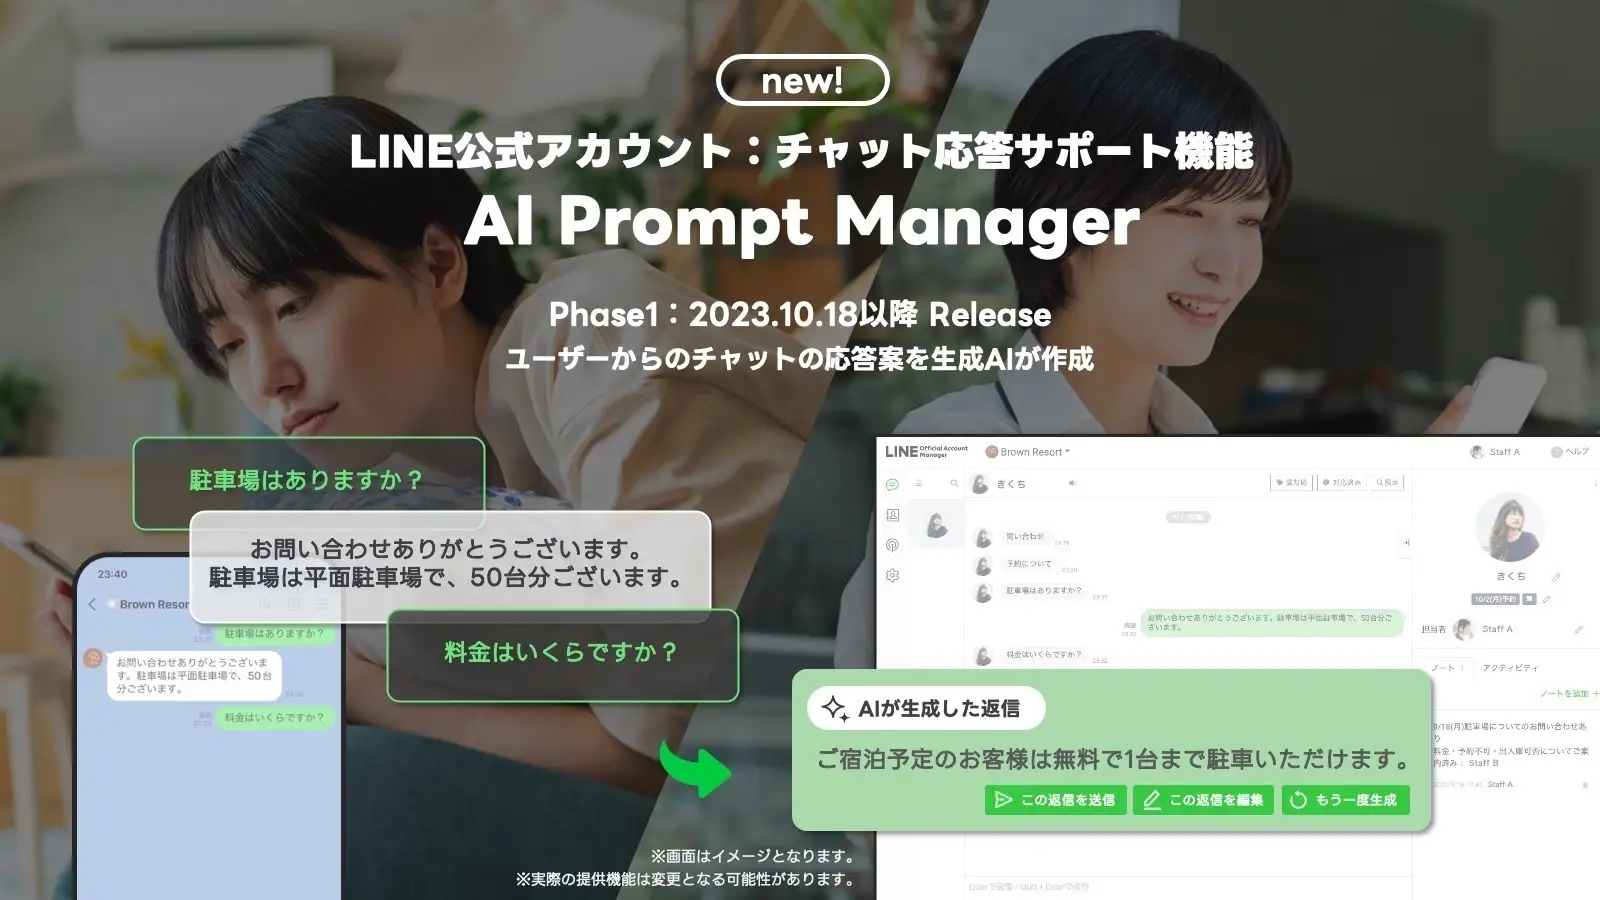 AI Prompt Manager image